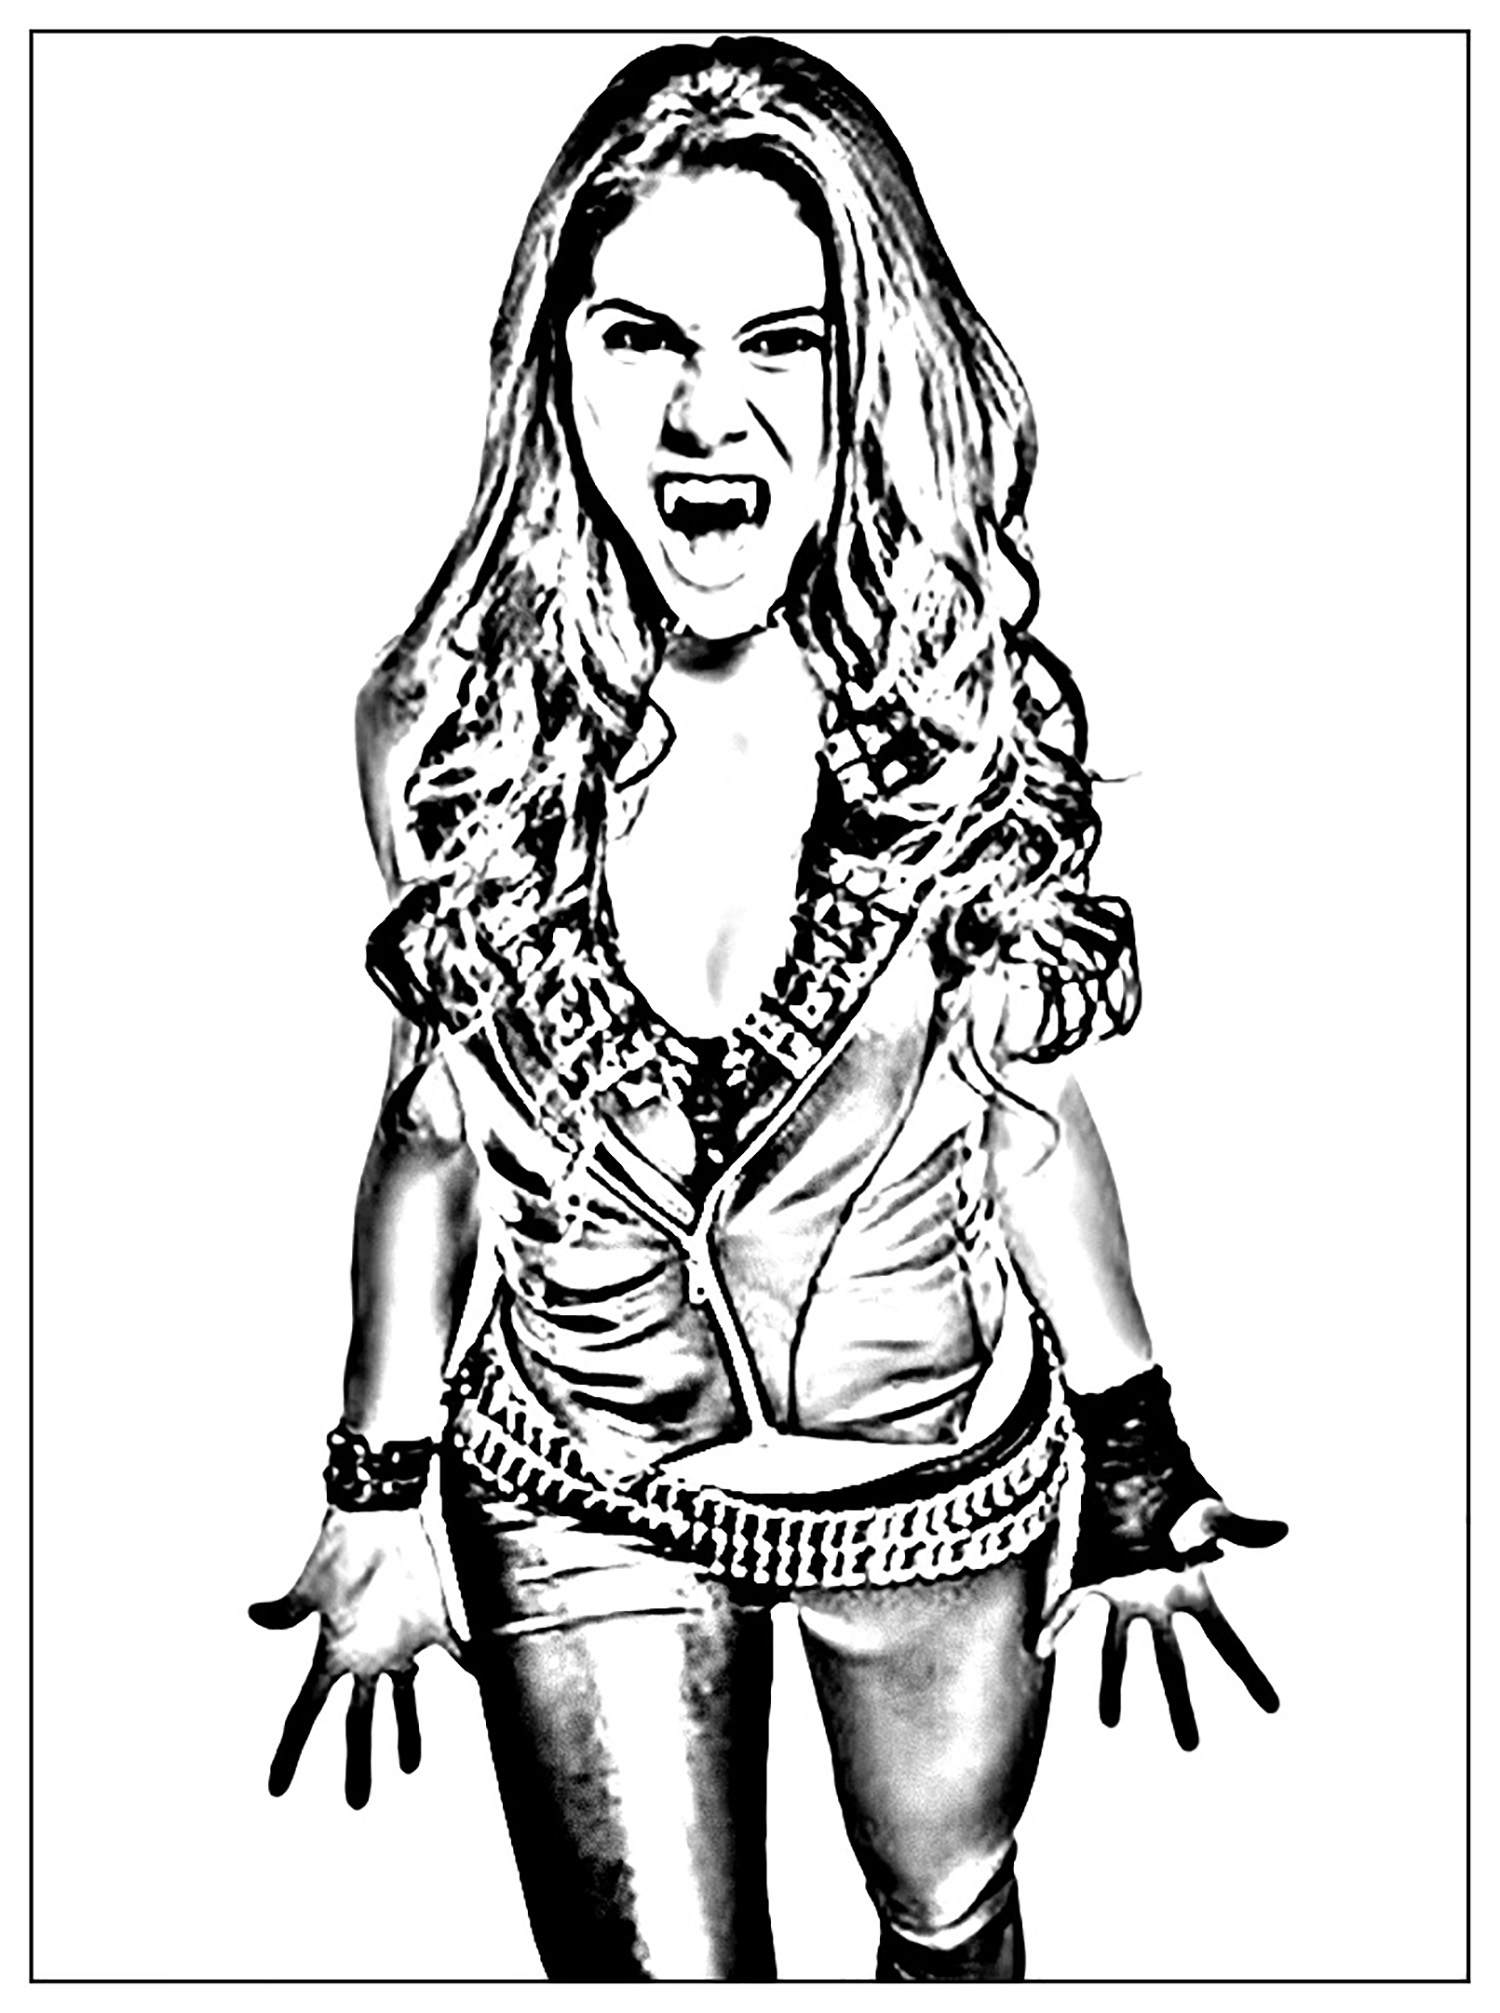 Chica Vampiro coloring page to print and color for free